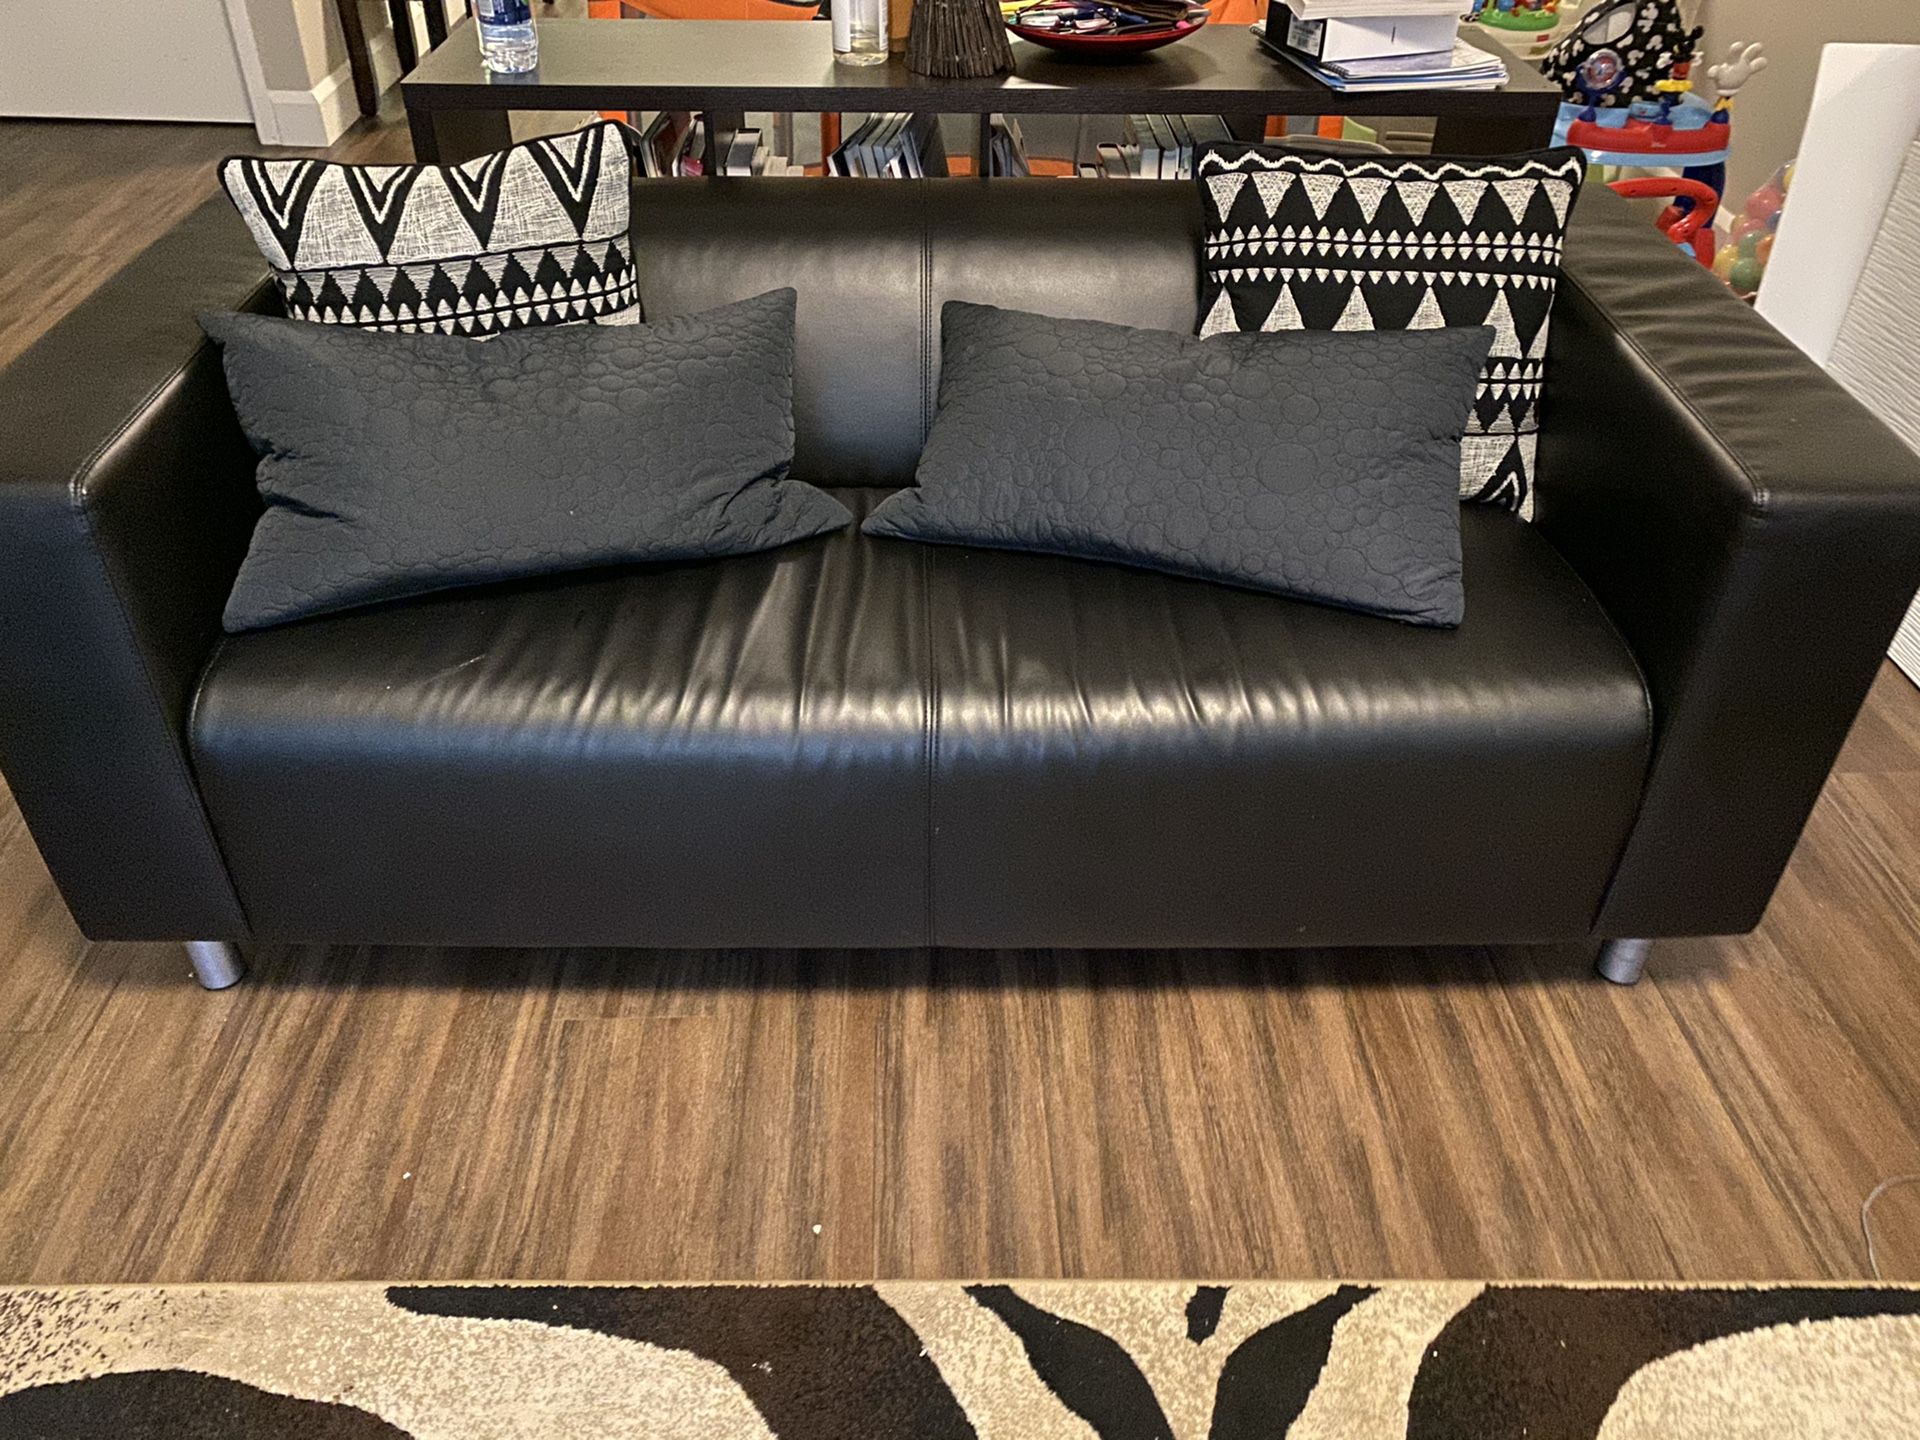 Sofa/couch and loveseat with pillows